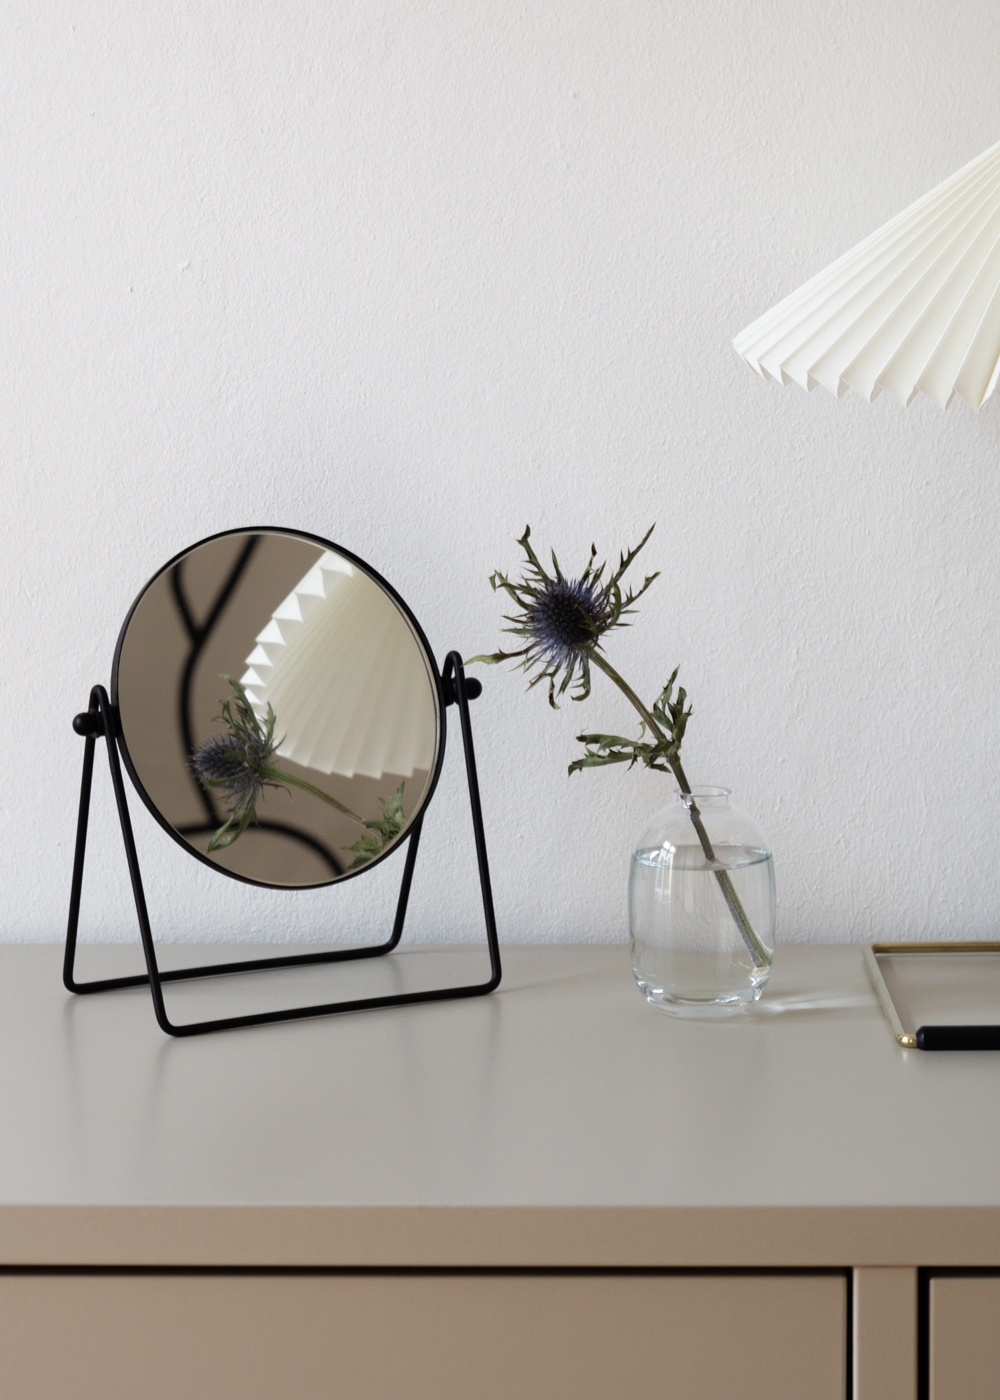 H&M Home Round Black Table Mirror - Neutral Home, Scandinavian Interior, Natural Aesthetic, Minimalist Decor, Beige Style, RG Daily Blog